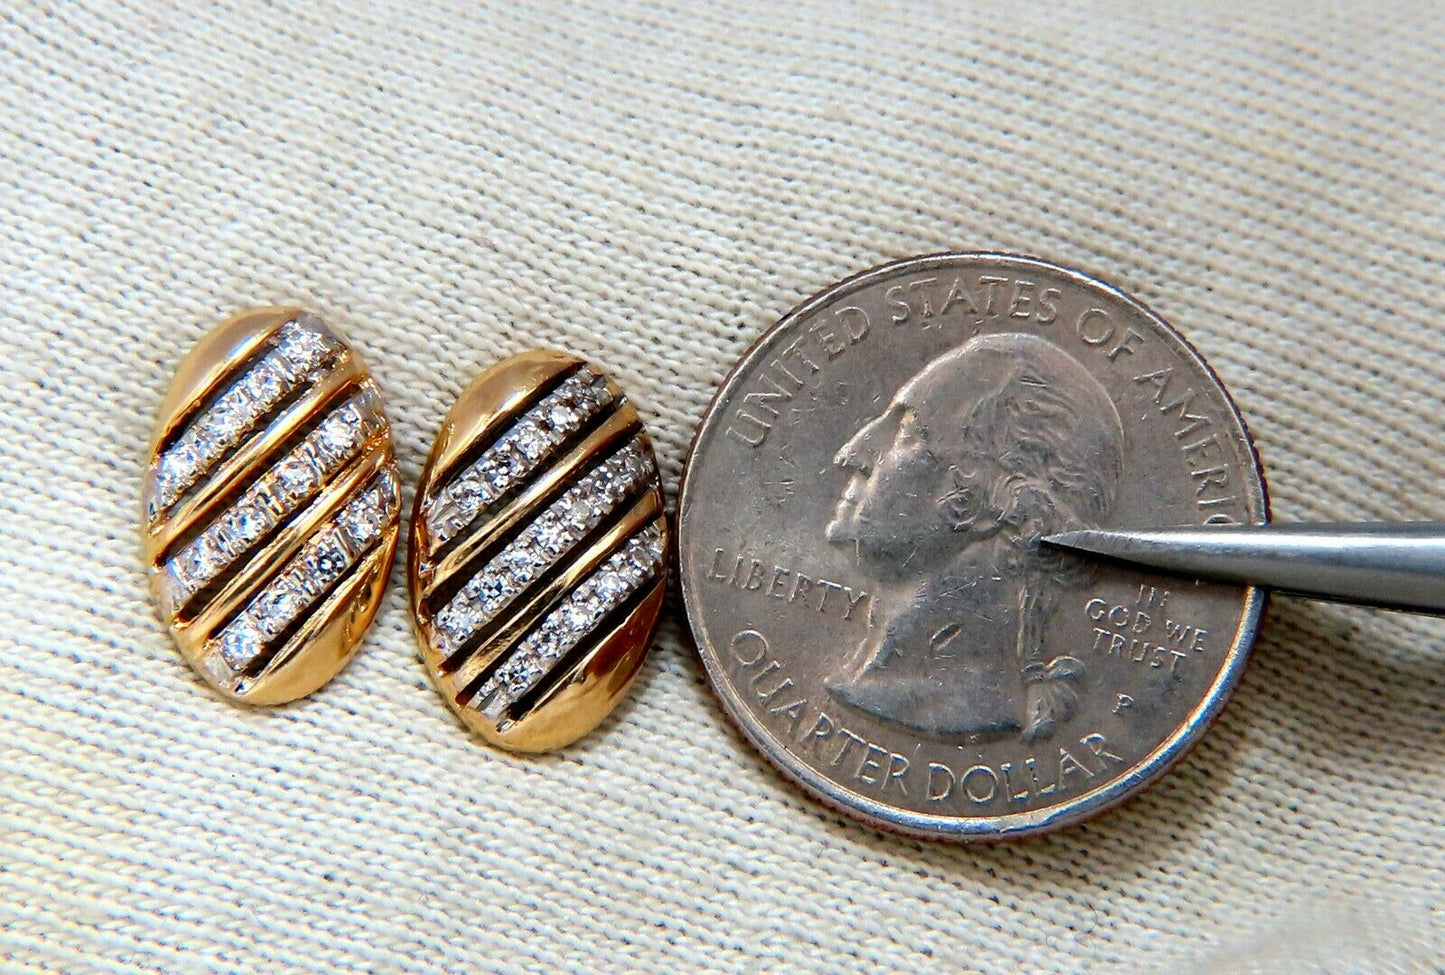 .20ct natural round diamonds oval striped earrings 14kt